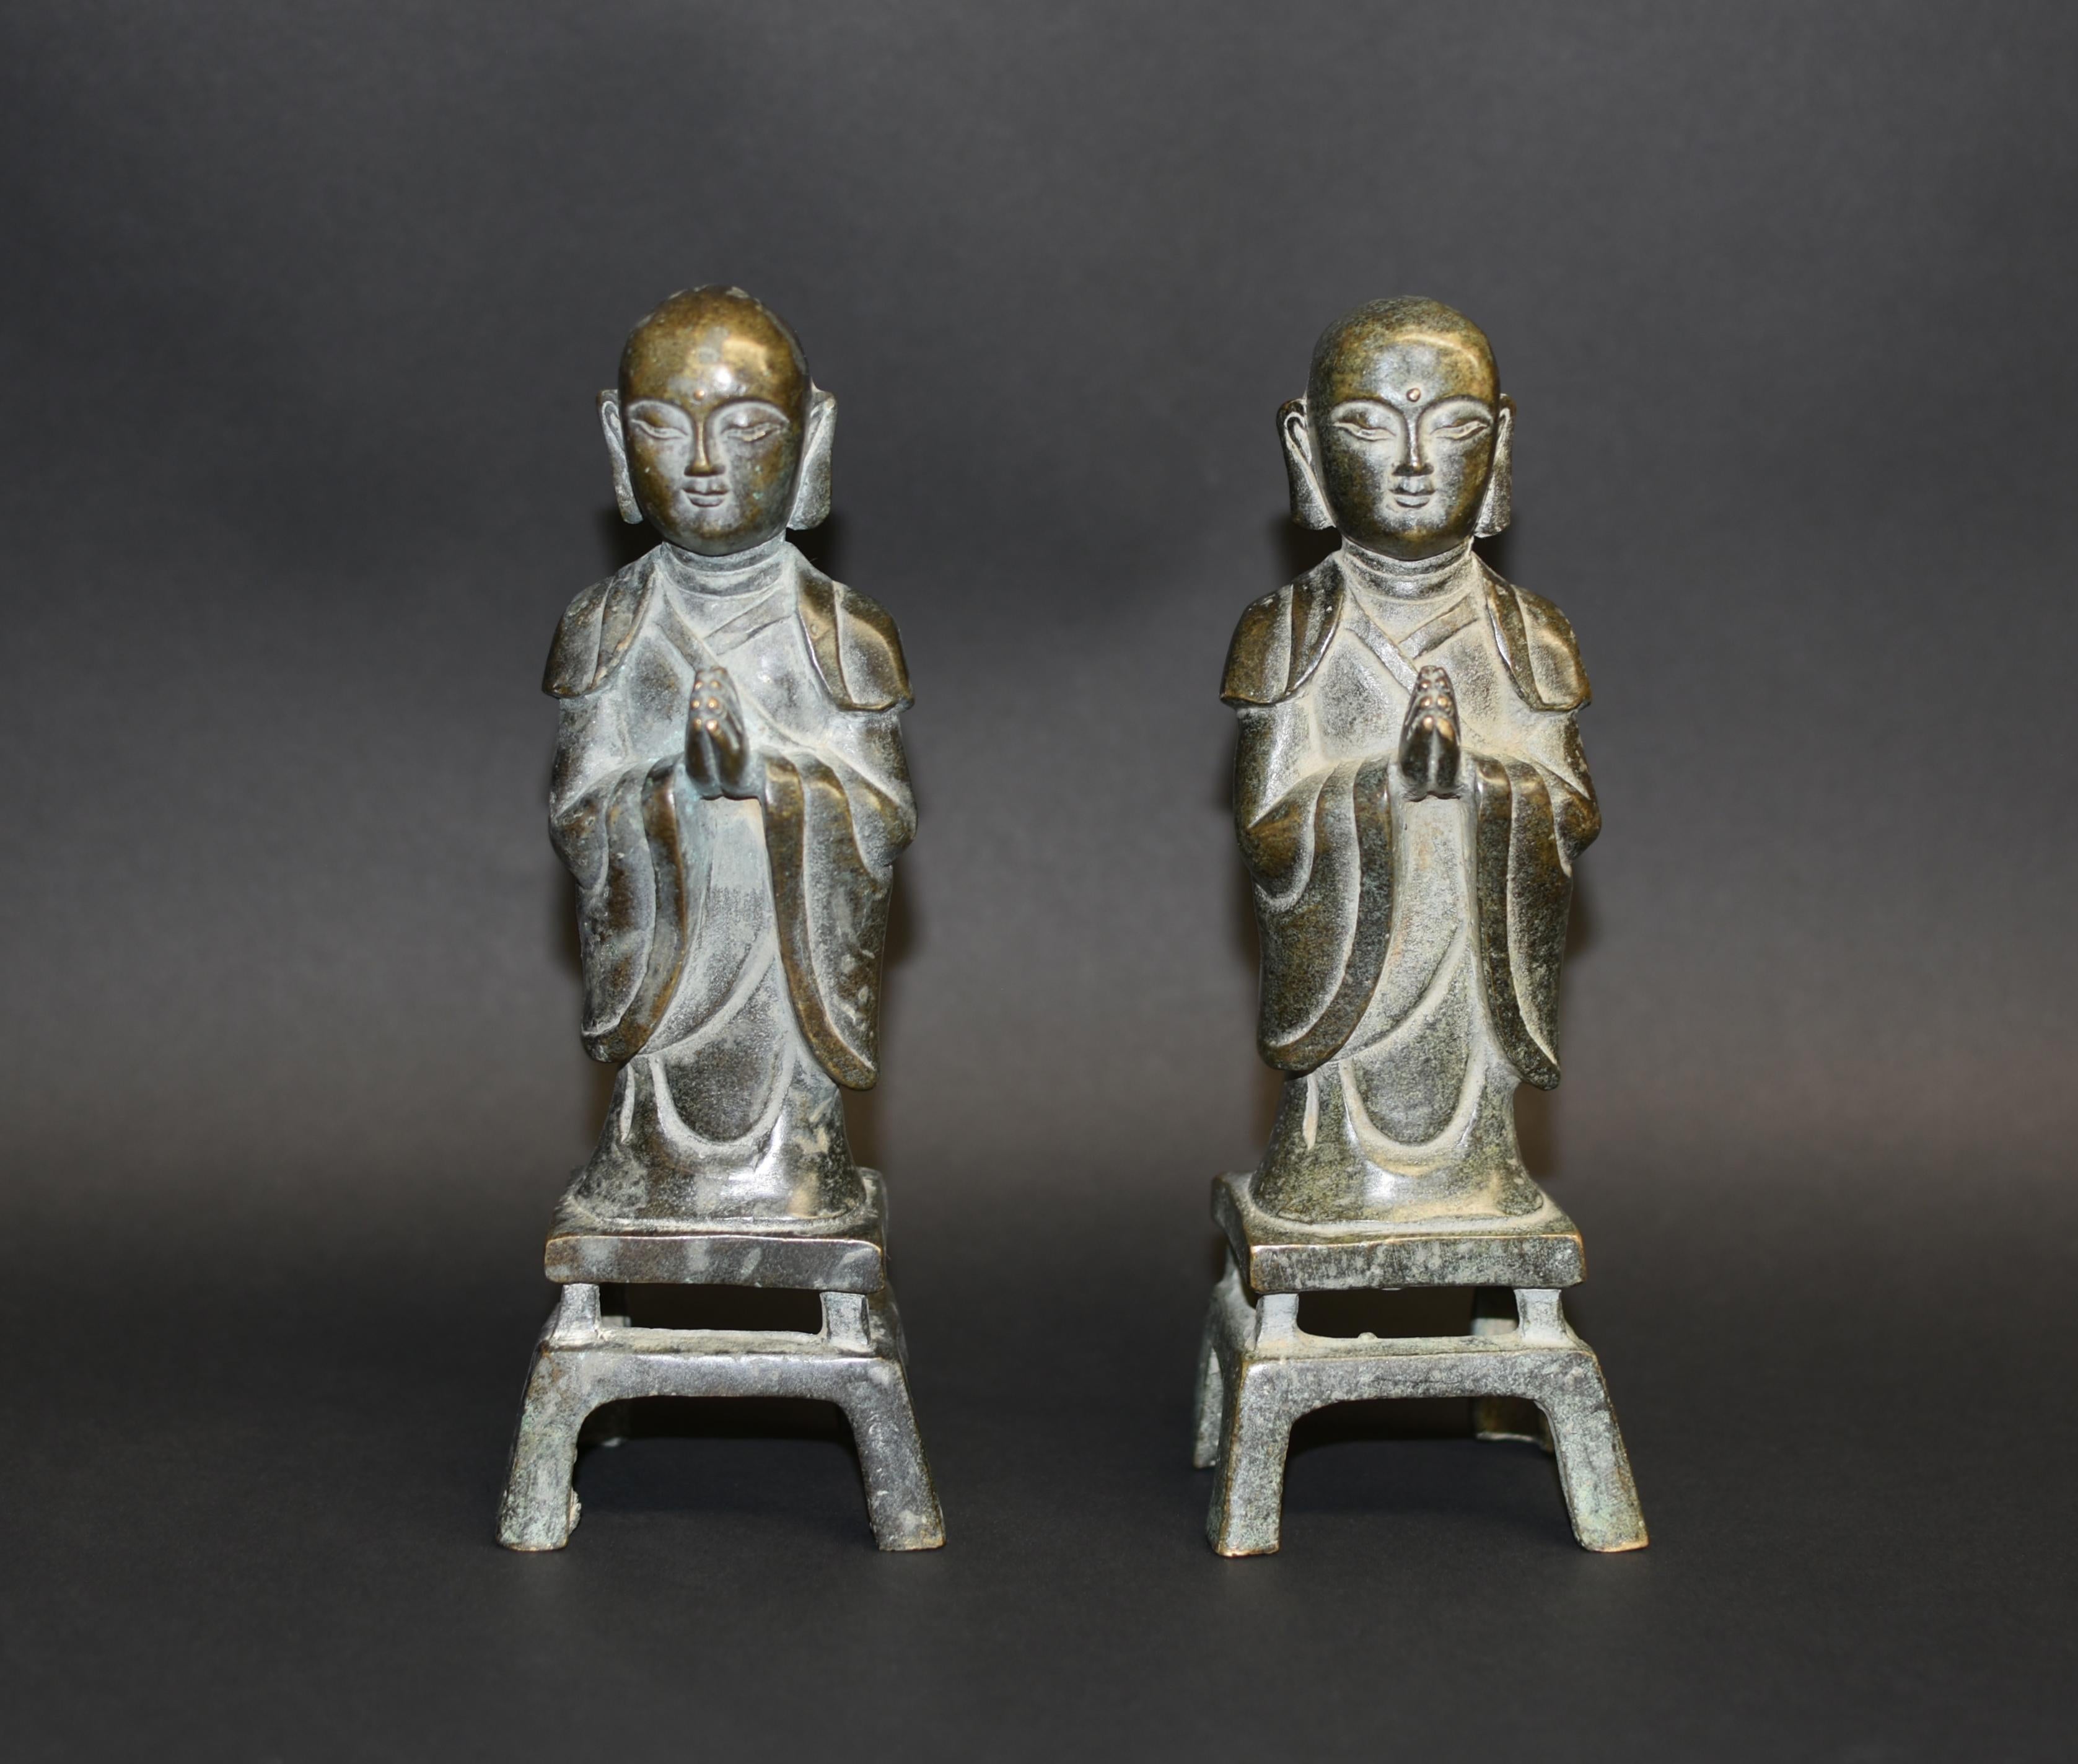 Standing atop a typical wei-style splayed four-legged plinth, the young monks rendered with a serene countenance, the round faces with large downcast eyes below arched brows, framed by long pendulous earlobes. The figures are clad in robes cascading